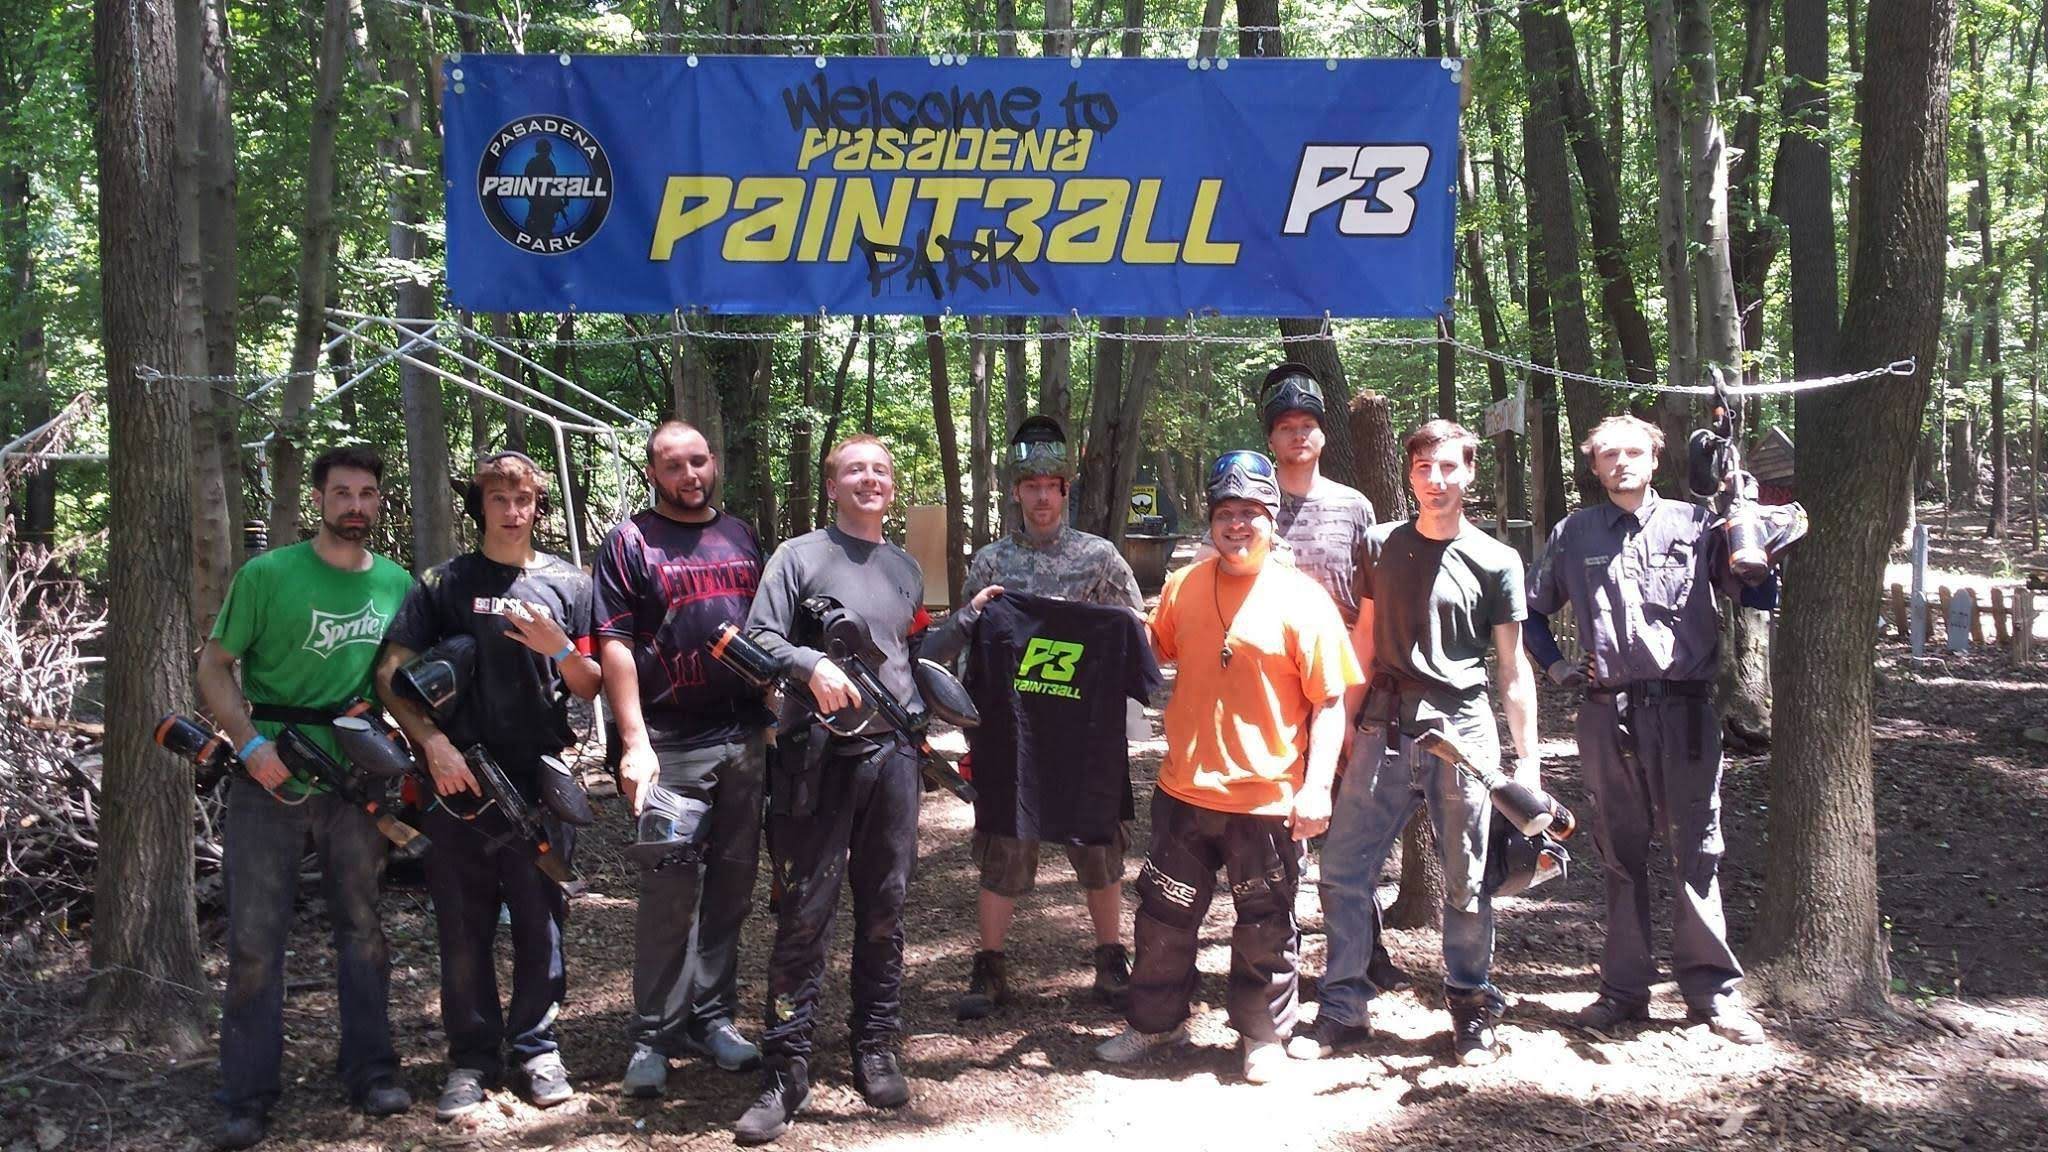 Nine men stand together in a forest setting for a group photo under a banner that reads 